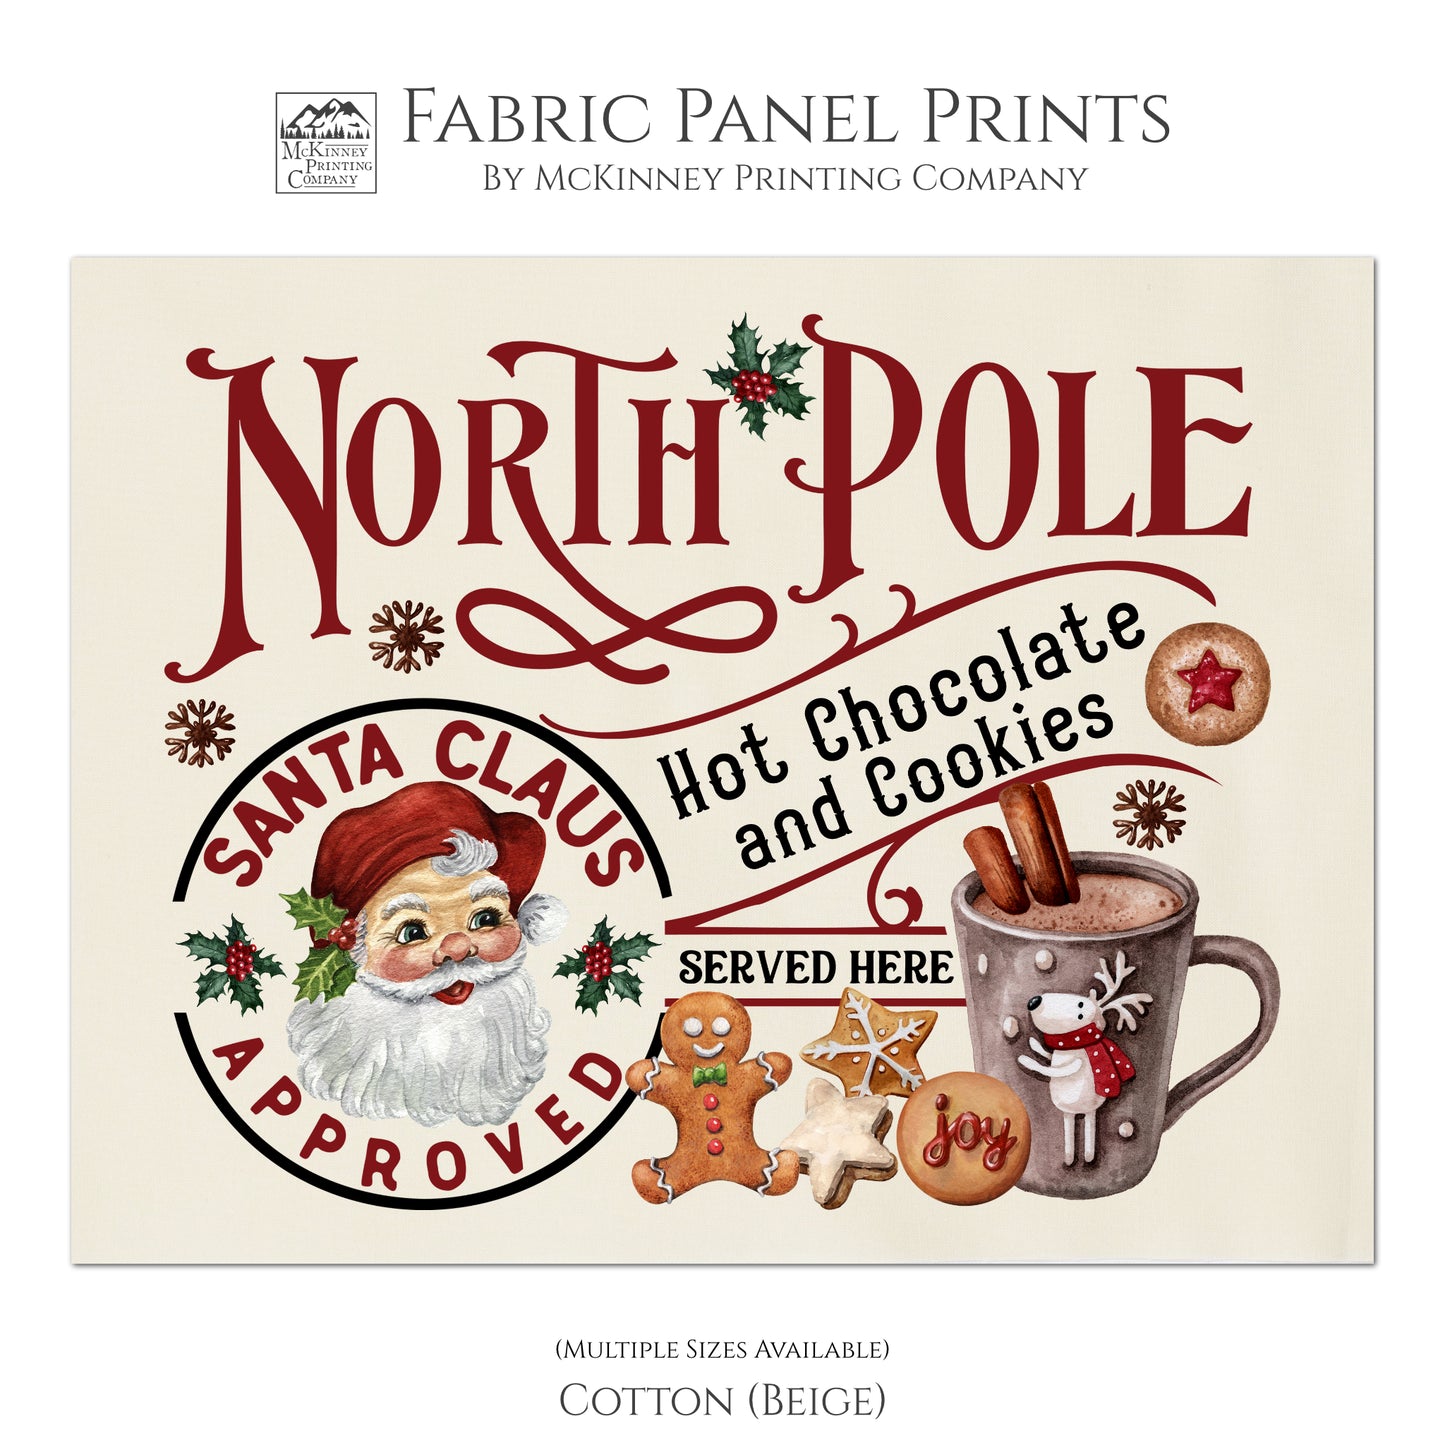 Christmas Fabric Panels, North Pole, Santa Claus, Hot Chocolate and Cookies, Fabric Panel Print, Wall Art, Quilt